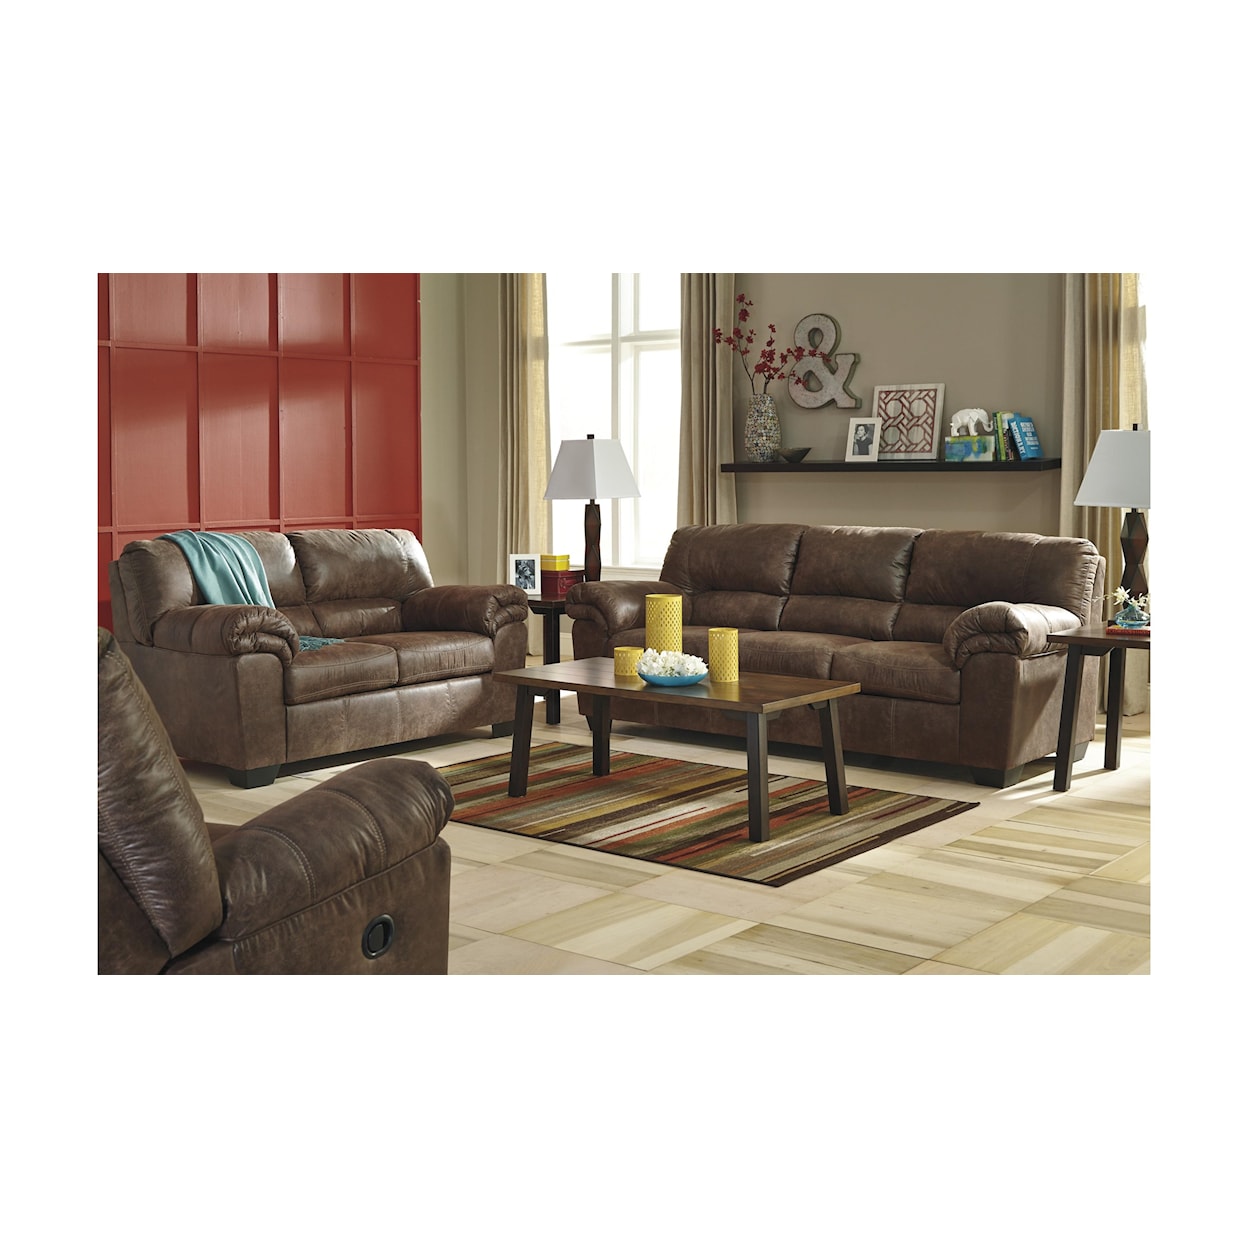 Signature Design by Ashley Furniture Bladen Sofa, Loveseat, and Recliner